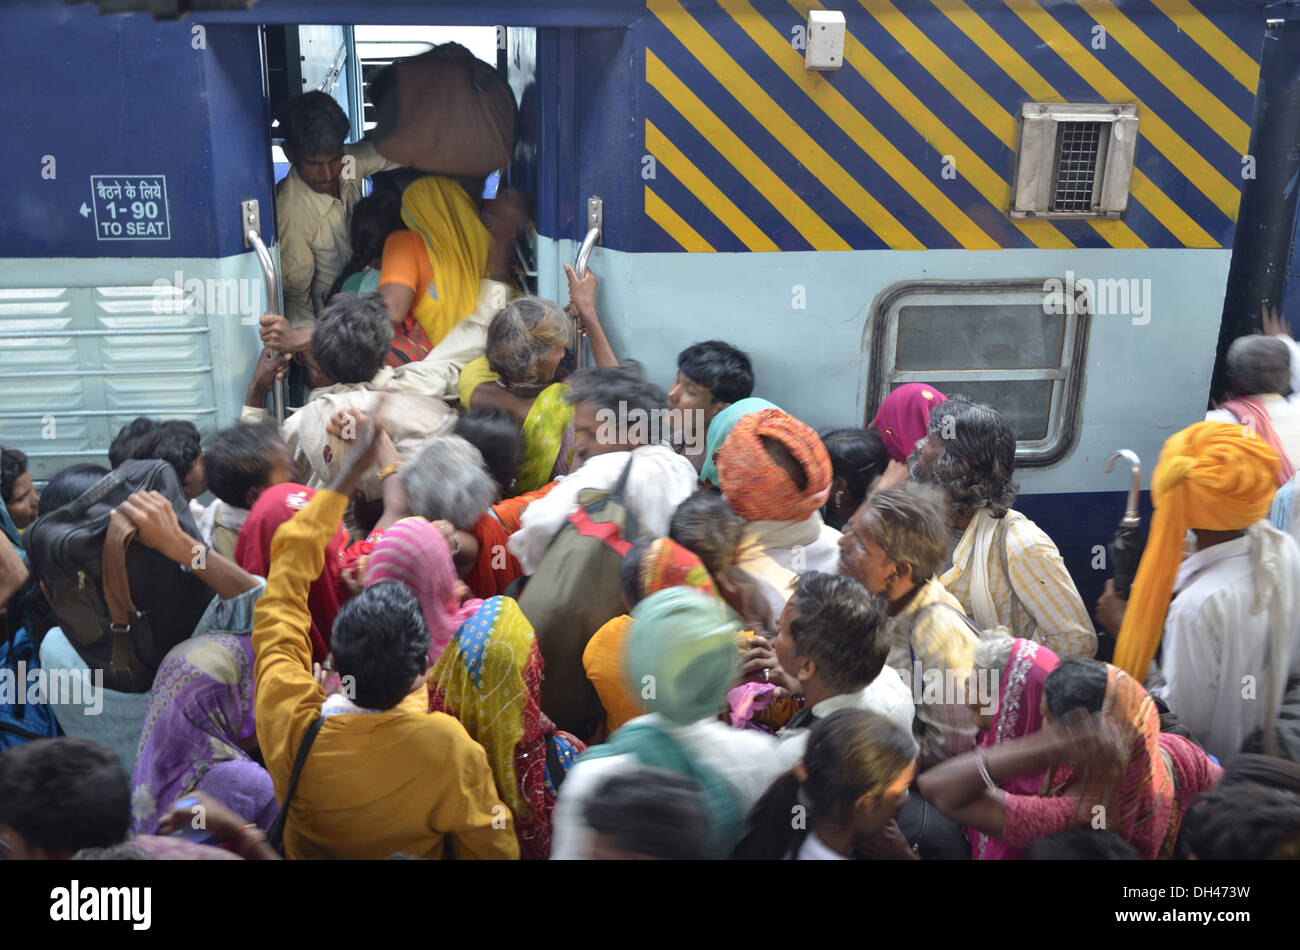 People crowded rushing trying to enter train bogie compartment at Jodhpur Rajasthan India Asia Stock Photo